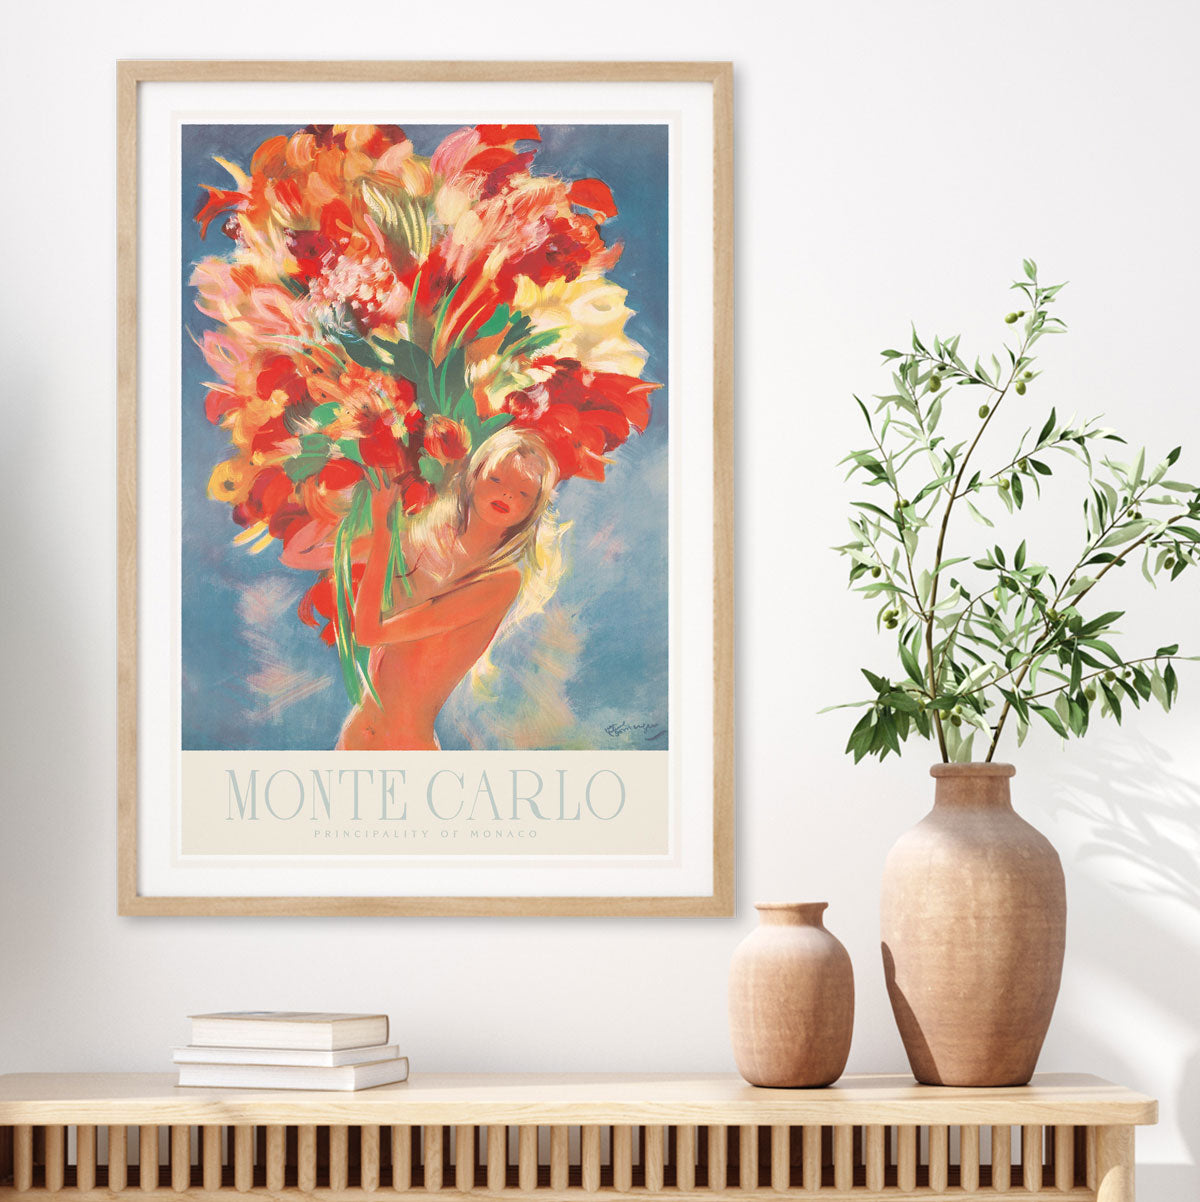 Monte Carlo Flowers retro vintage travel framed print from Places We Luv